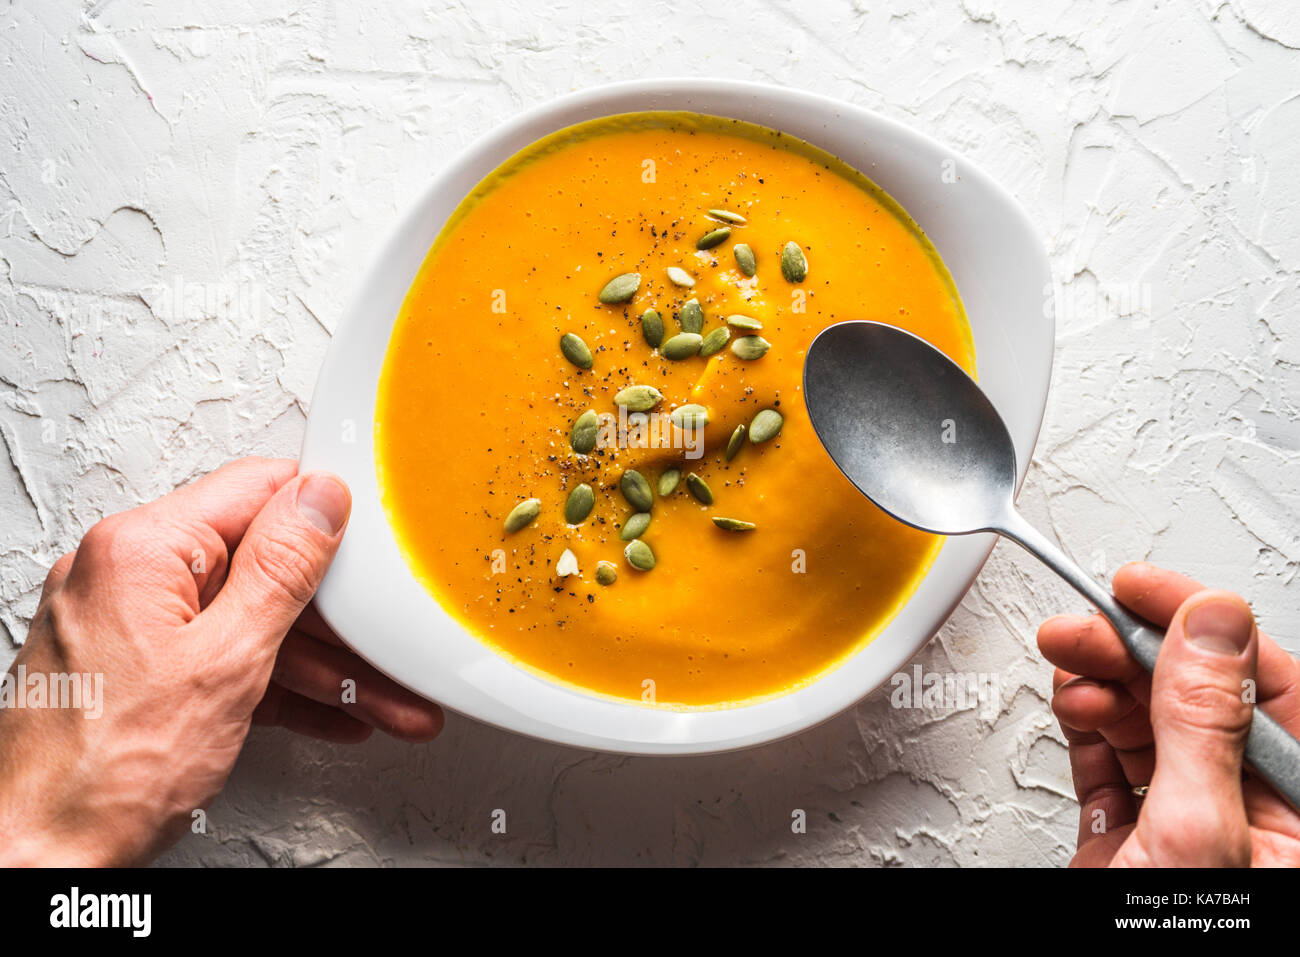 Pumpkin soup with seeds and a spoon in hand horizontal Stock Photo